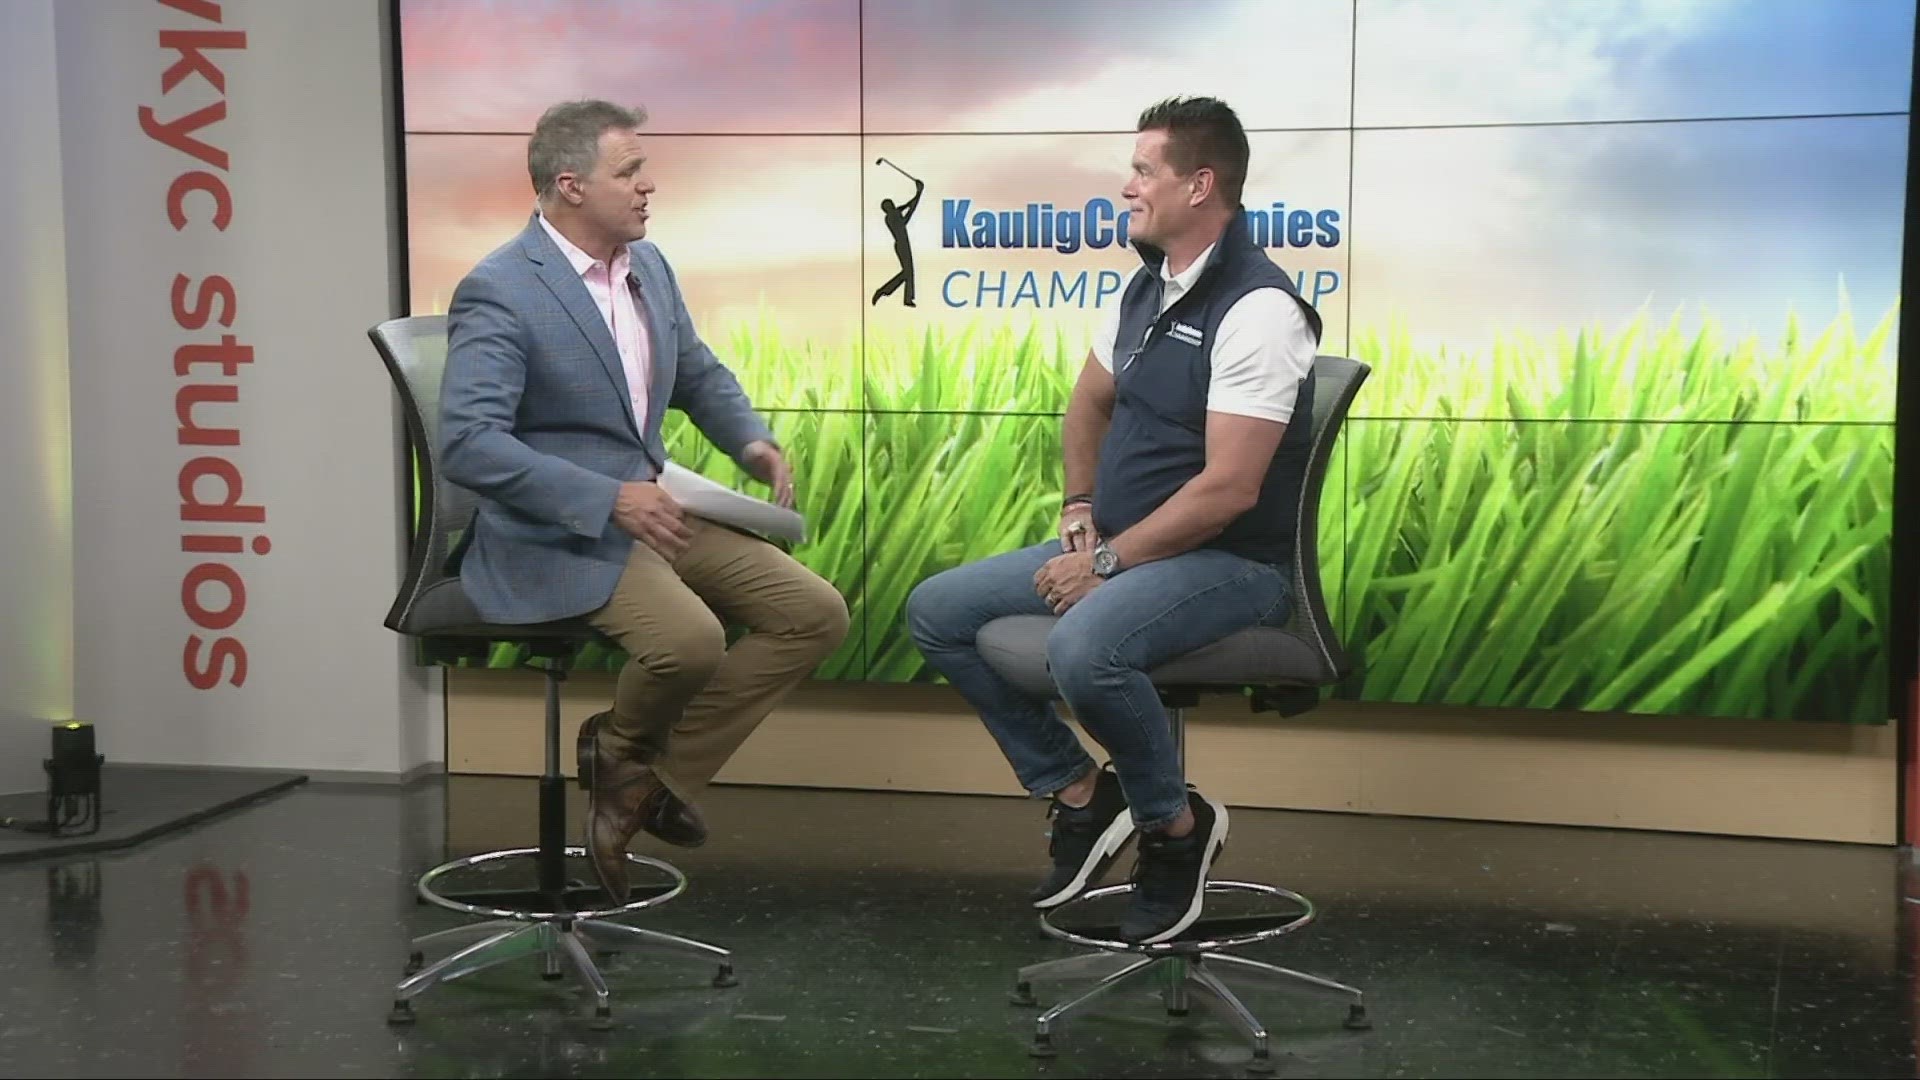 The Kaulig Companies Championship will take place at Akron's Firestone Country Club July 13-16. Matt Kaulig joins Jay Crawford to discuss the upcoming tournament.